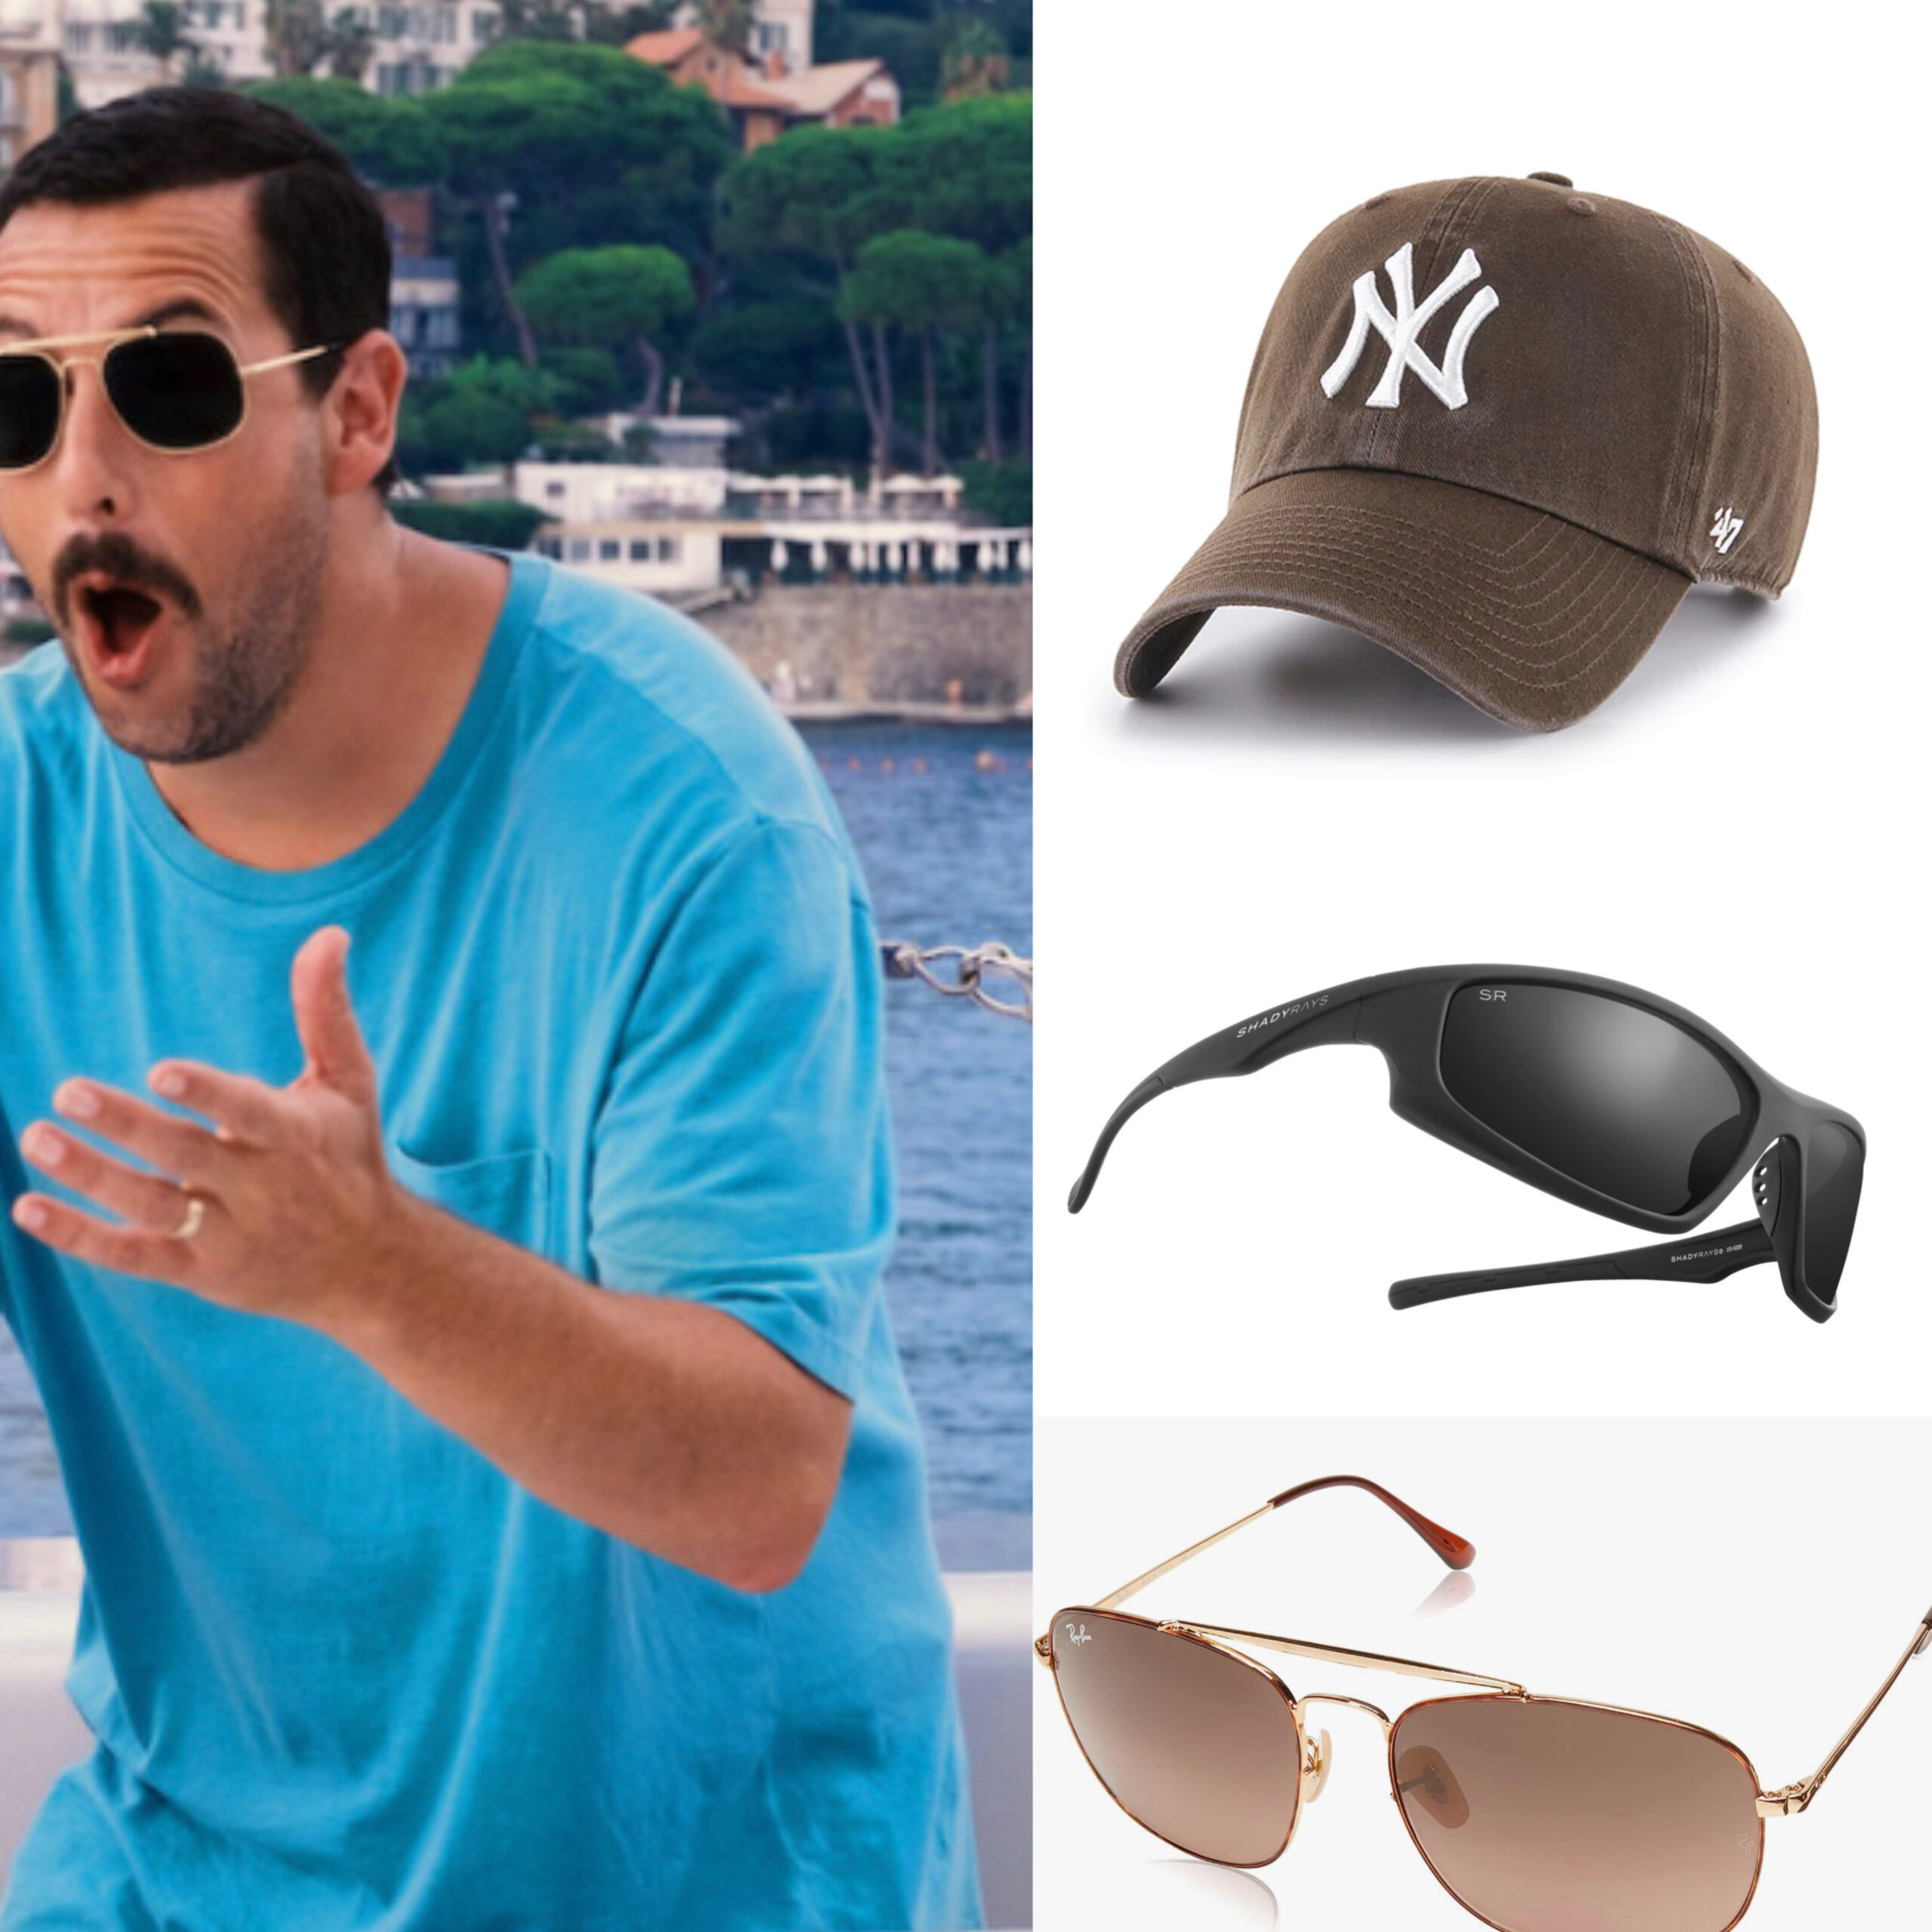 This is the Perfect Recipe for recreating “The Adam Sandler Outfit